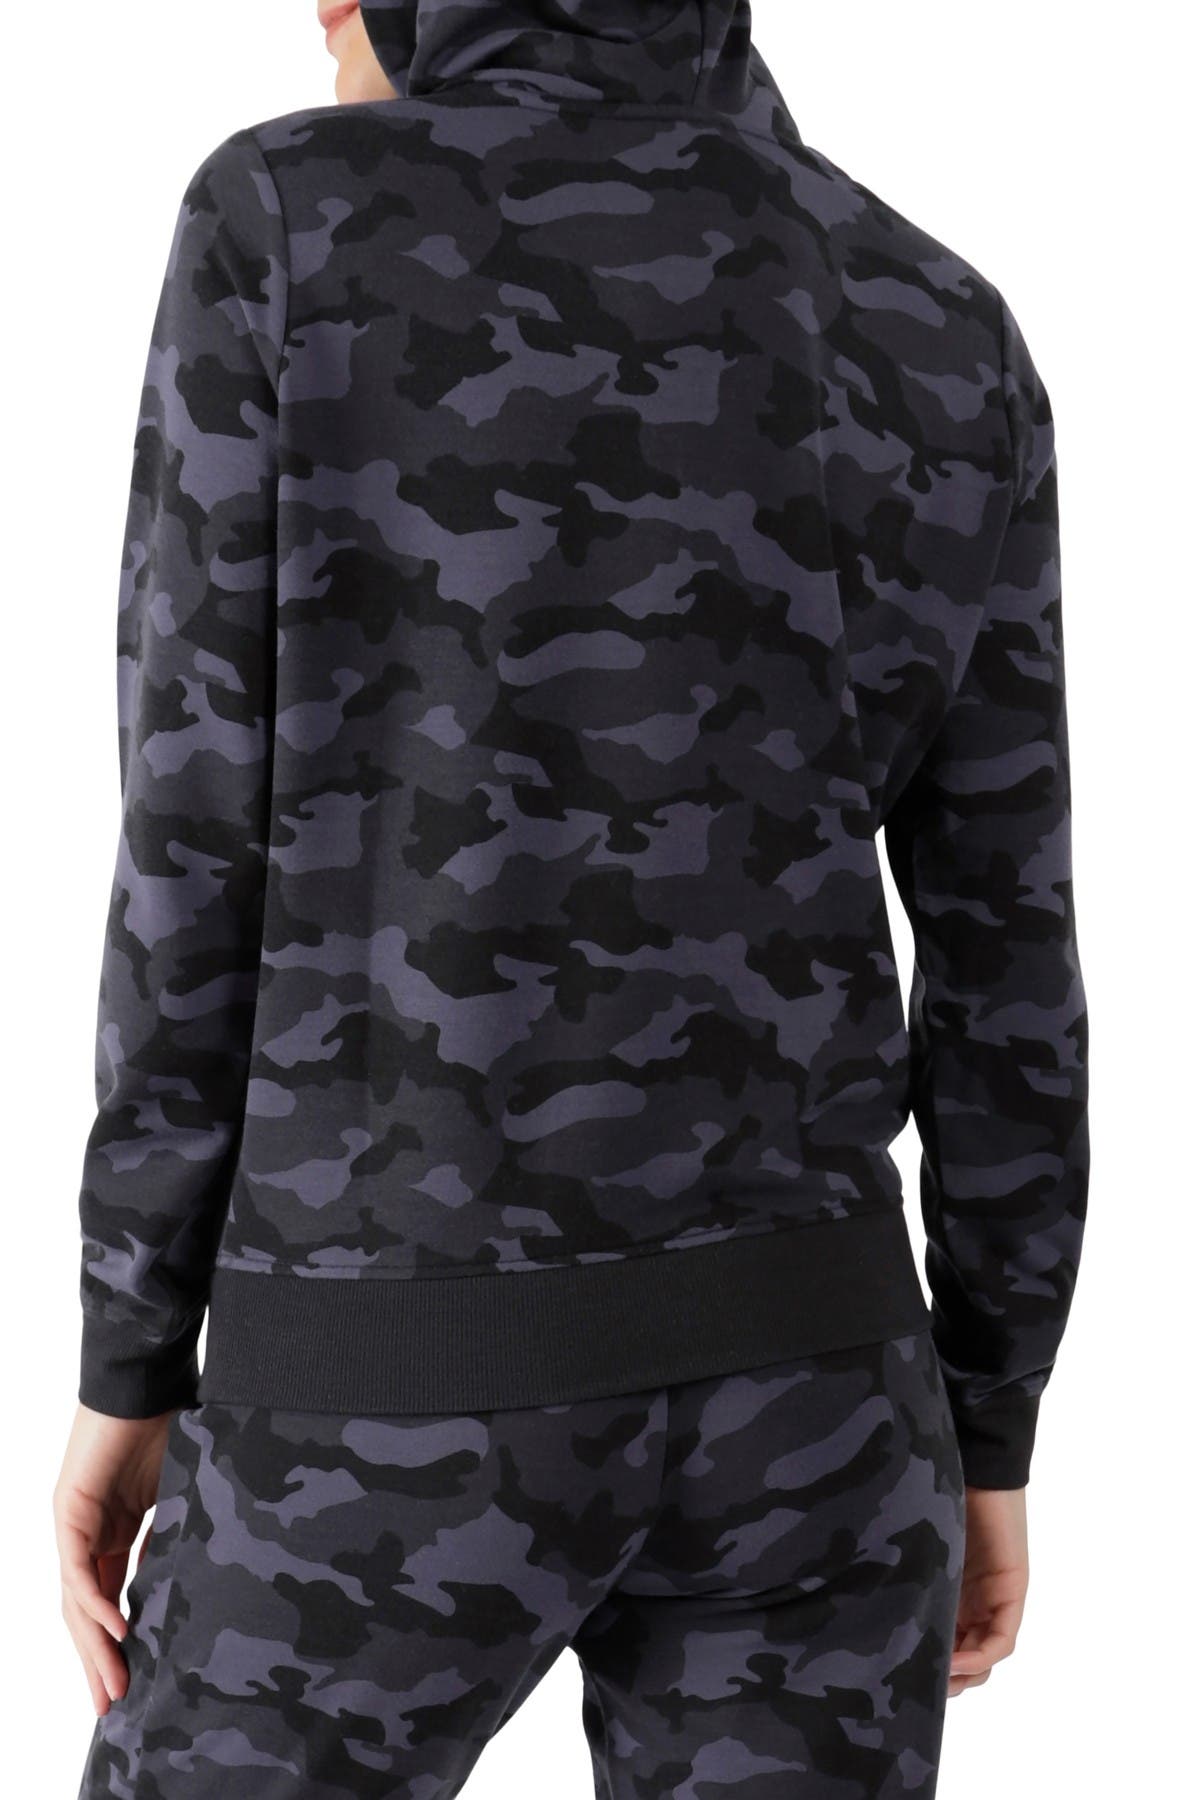 90 Degree By Reflex Terry Brushed Pullover Hoodie In P600 Camo Navy Comb